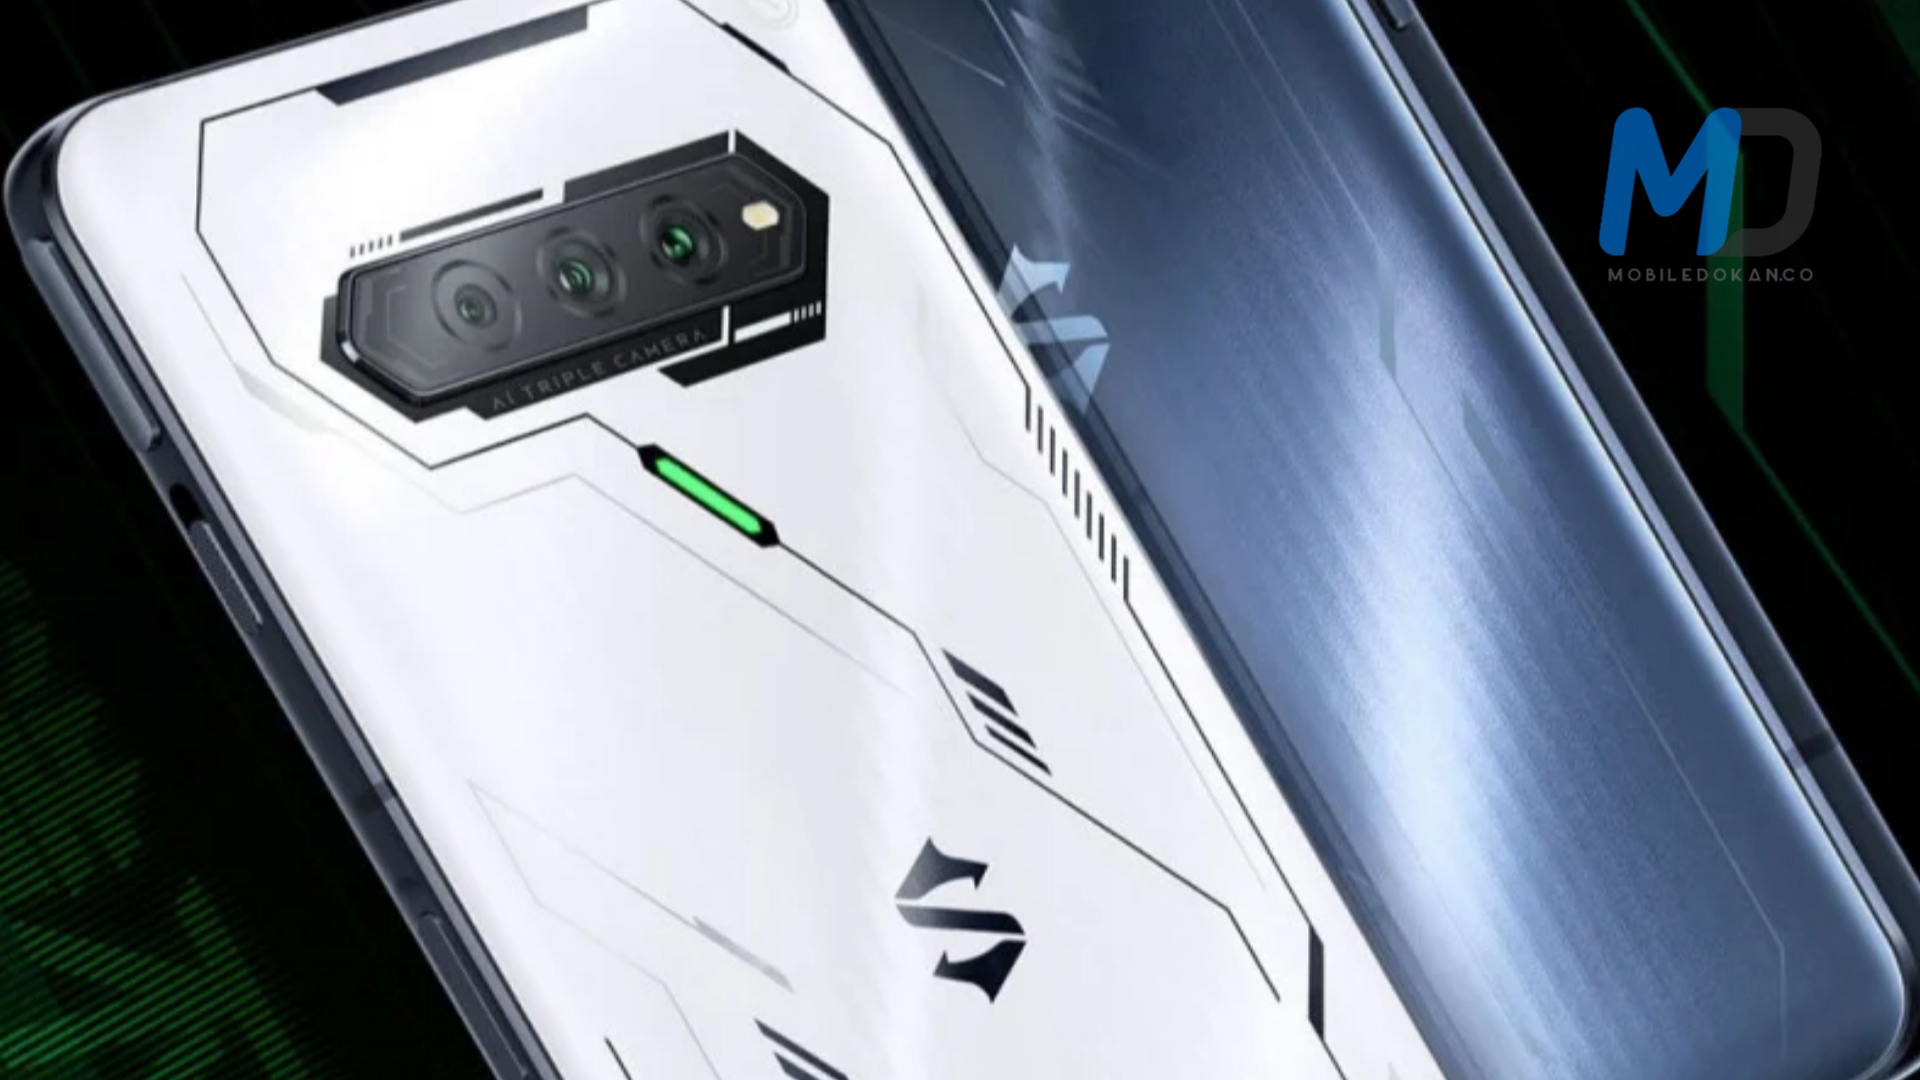 Black Shark 4S revealed it’s Specification, Price, Colors